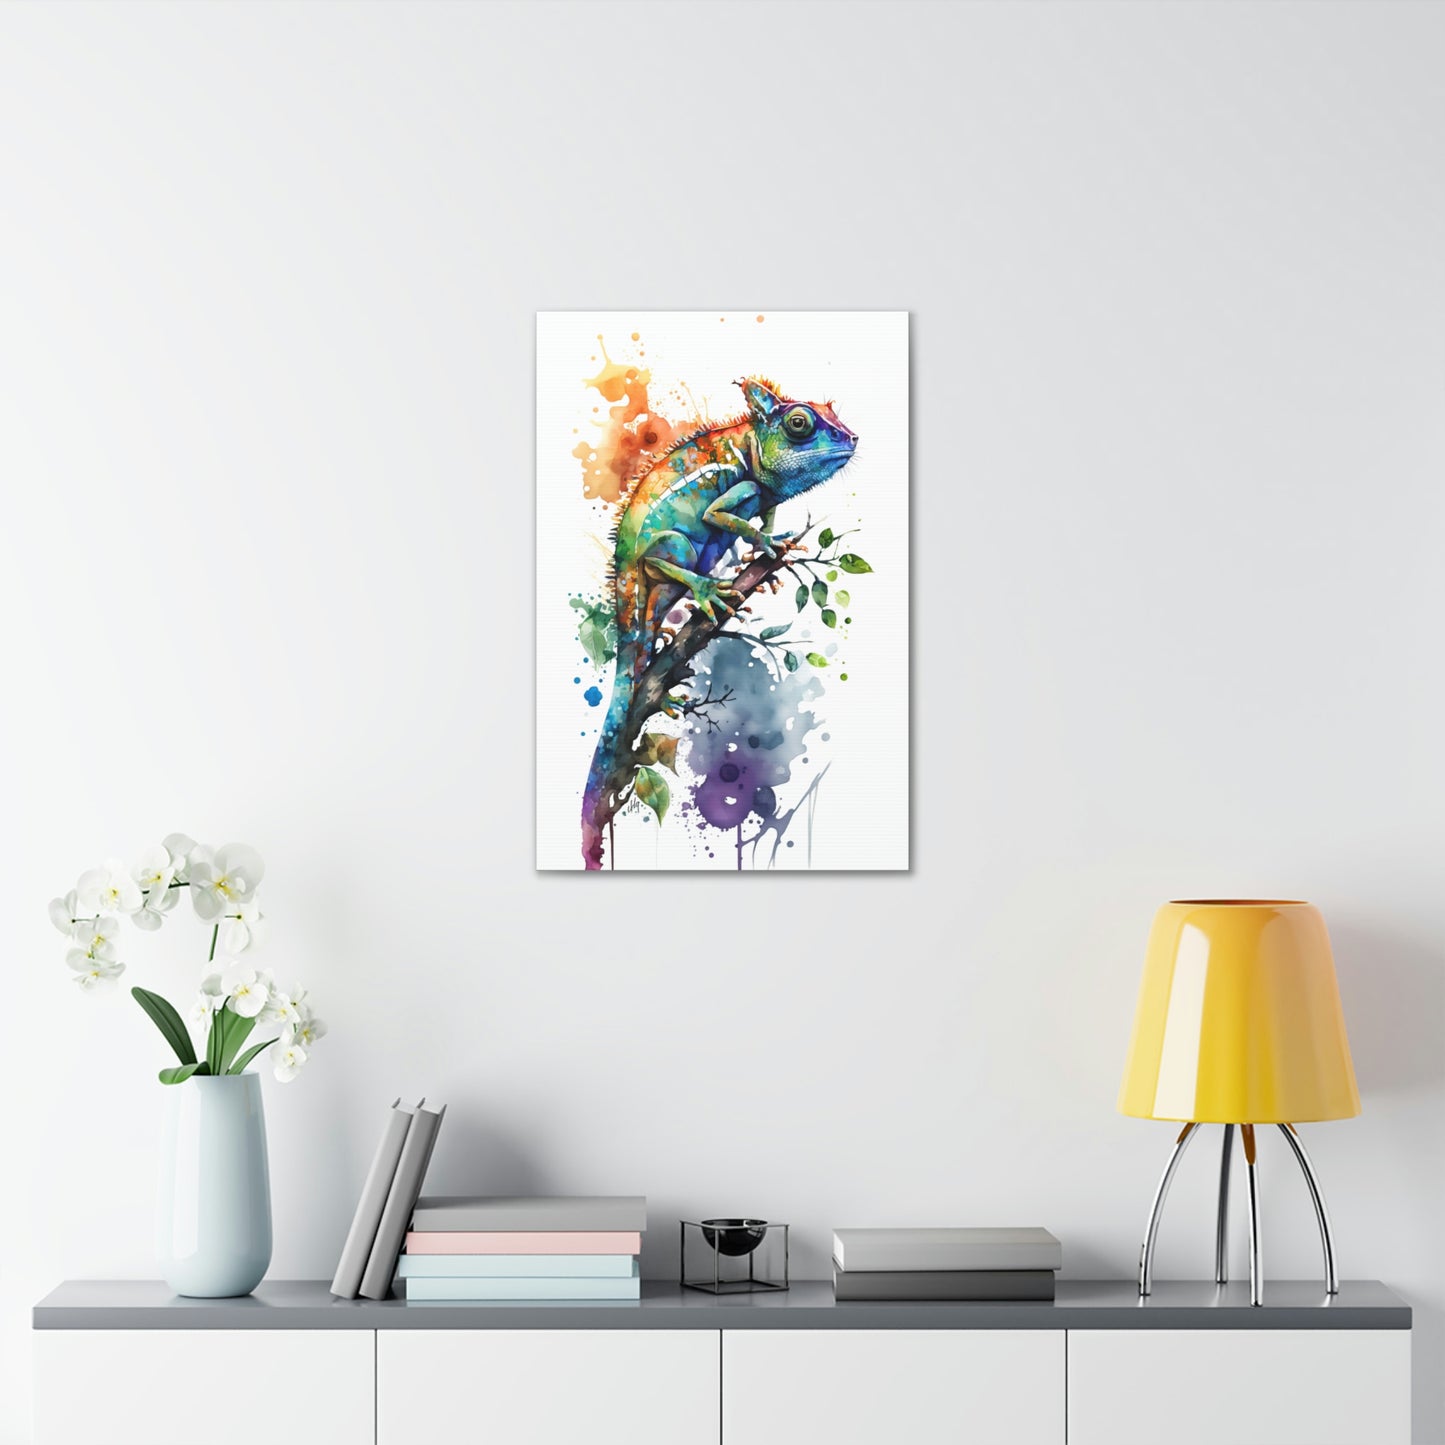 Chameleon Wall Art from the Wildlife Collection, a vivid portrayal on canvas capturing the unique essence of this adaptable creature, perfect for enthusiasts of nature-inspired decor and chic home accessories.